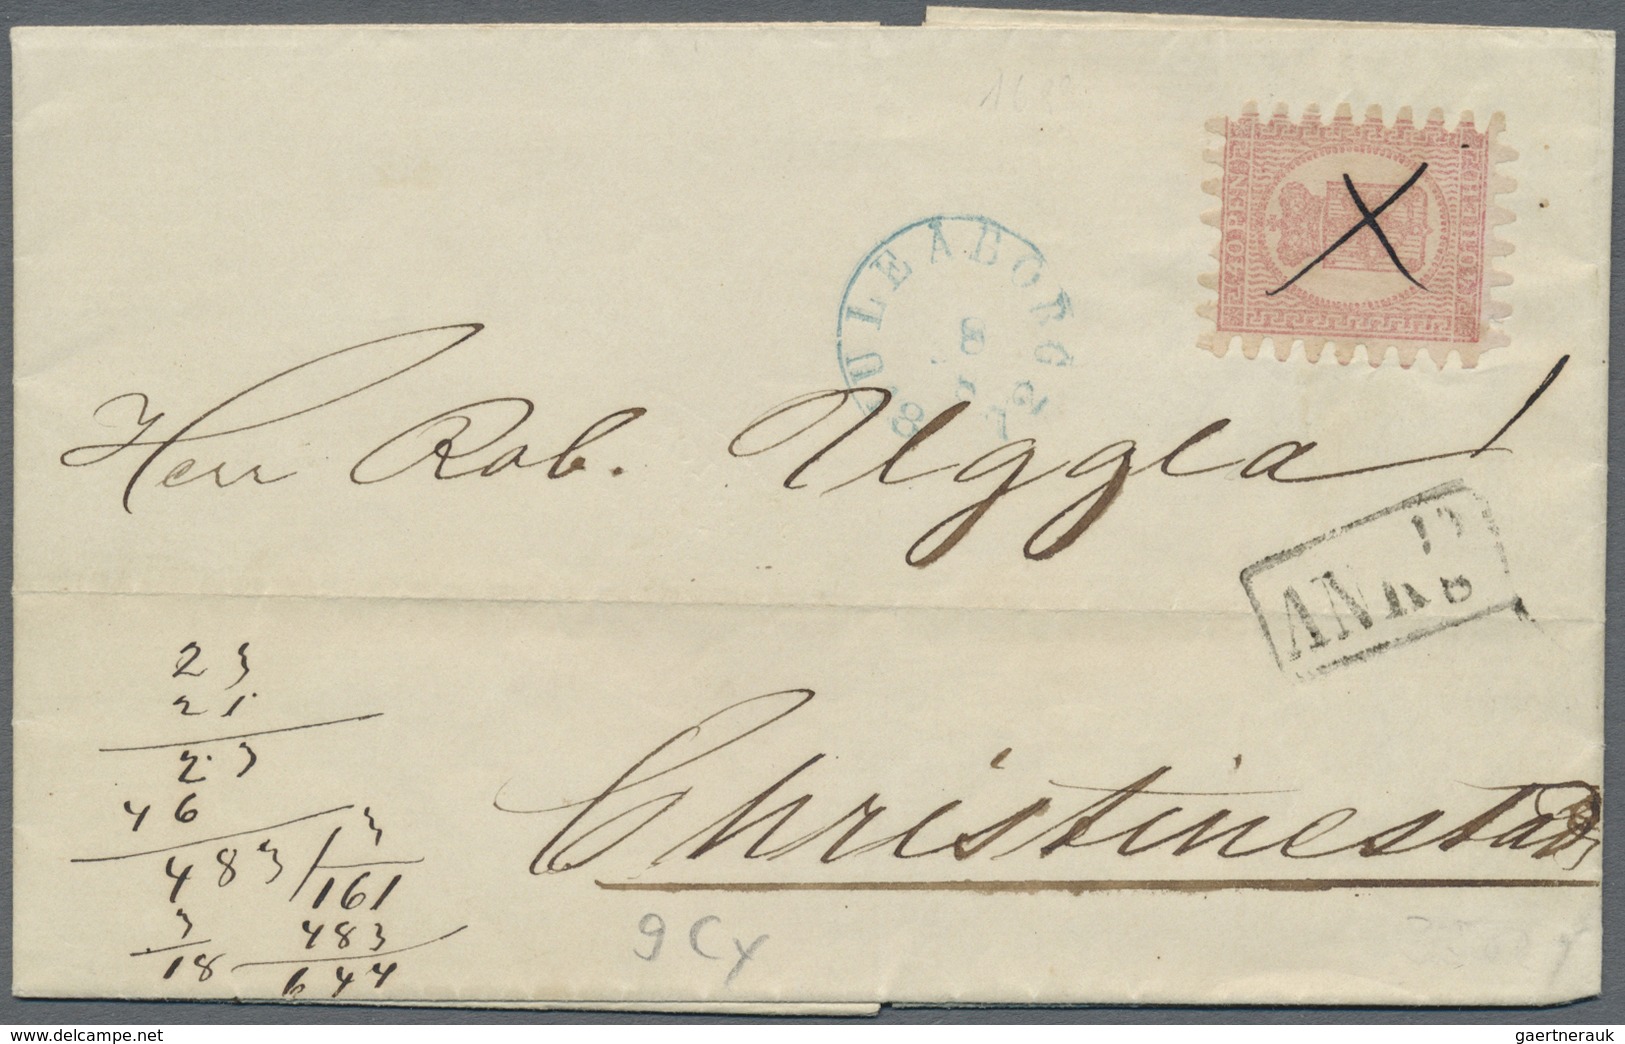 GA Finnland: 1856/1963, interesting lot of ca. 60 franked covers/postcards and postal stationery (unuse